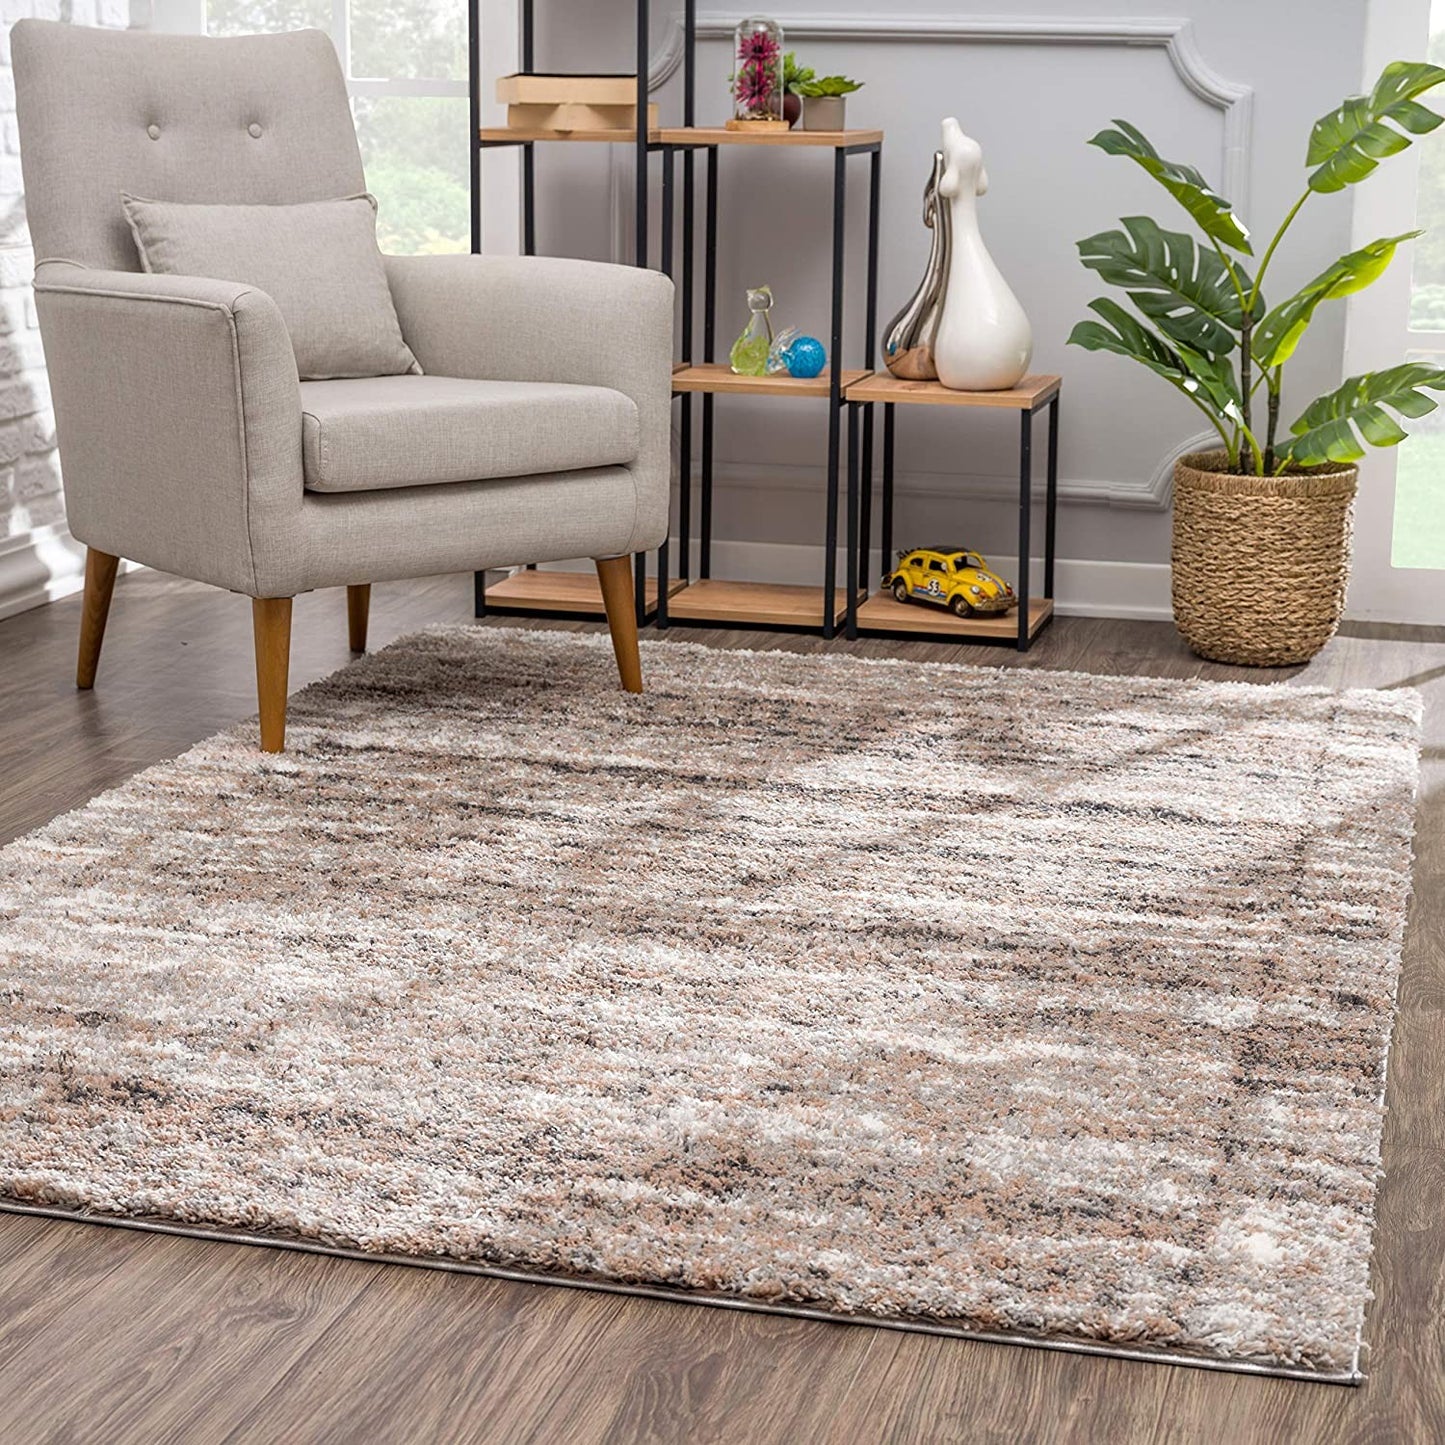 4’ X 6’ Ivory And Brown Retro Mod Area Rug